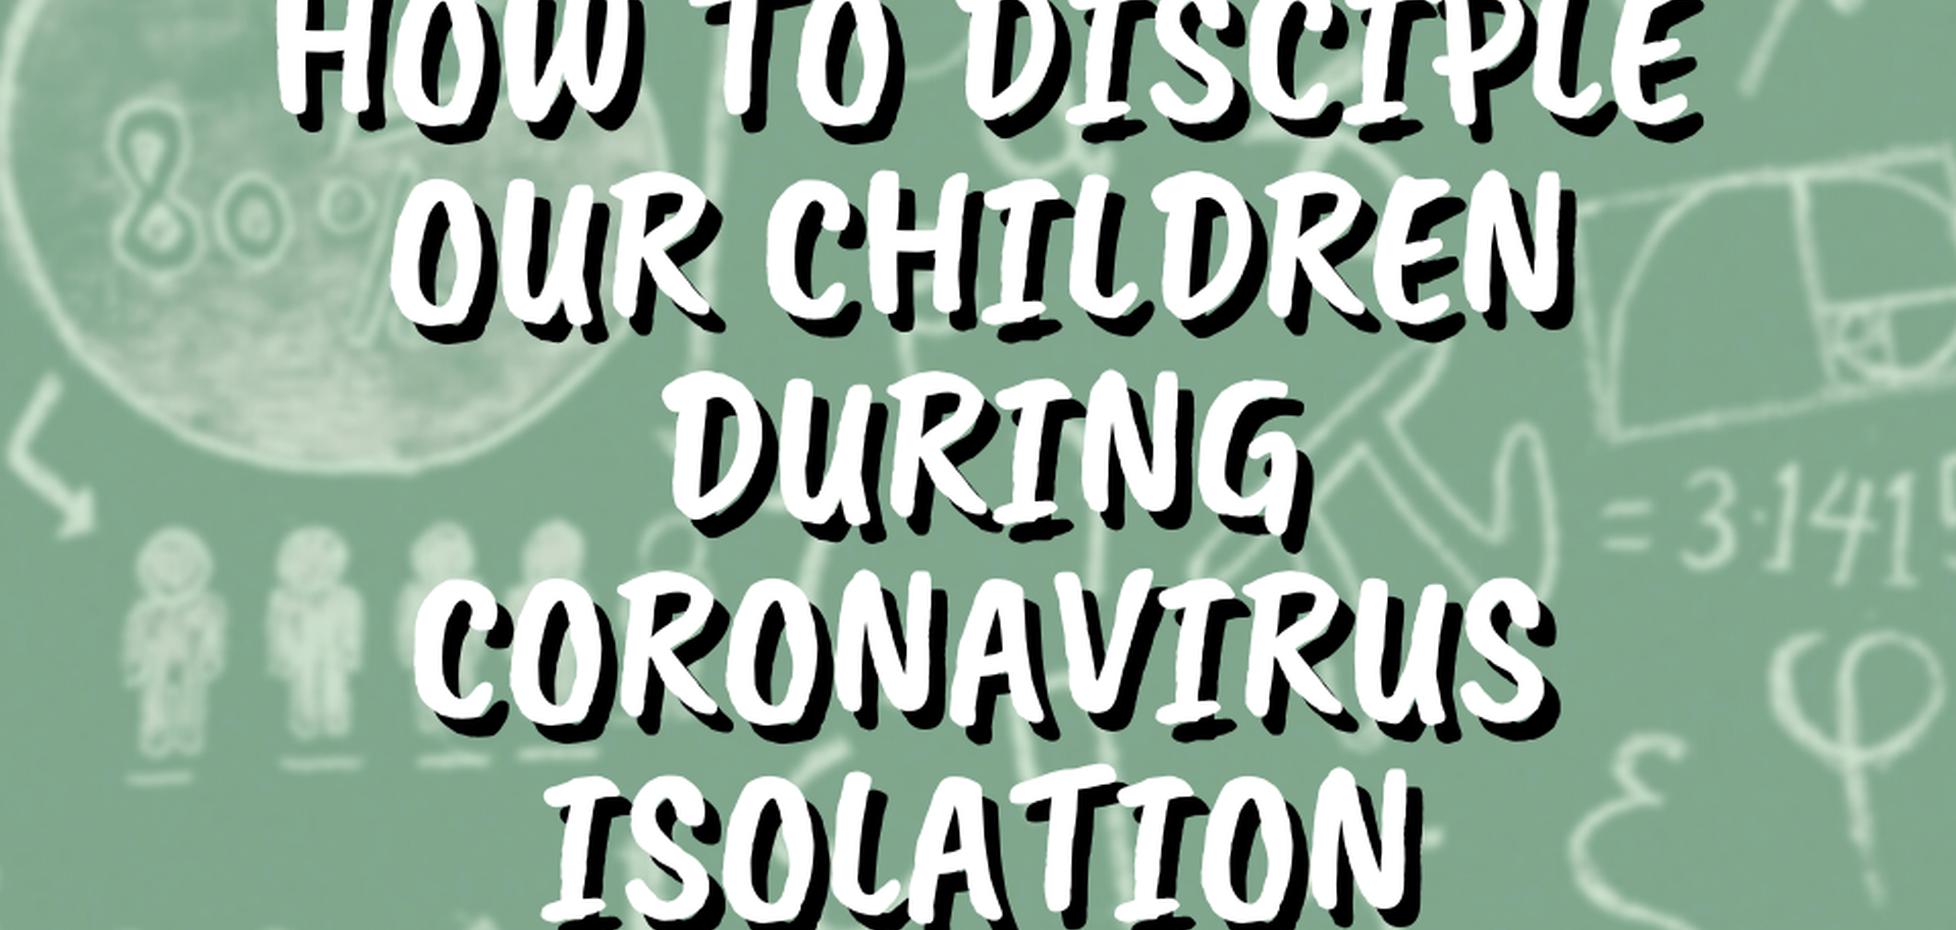 How to Disciple Kids During Isolation